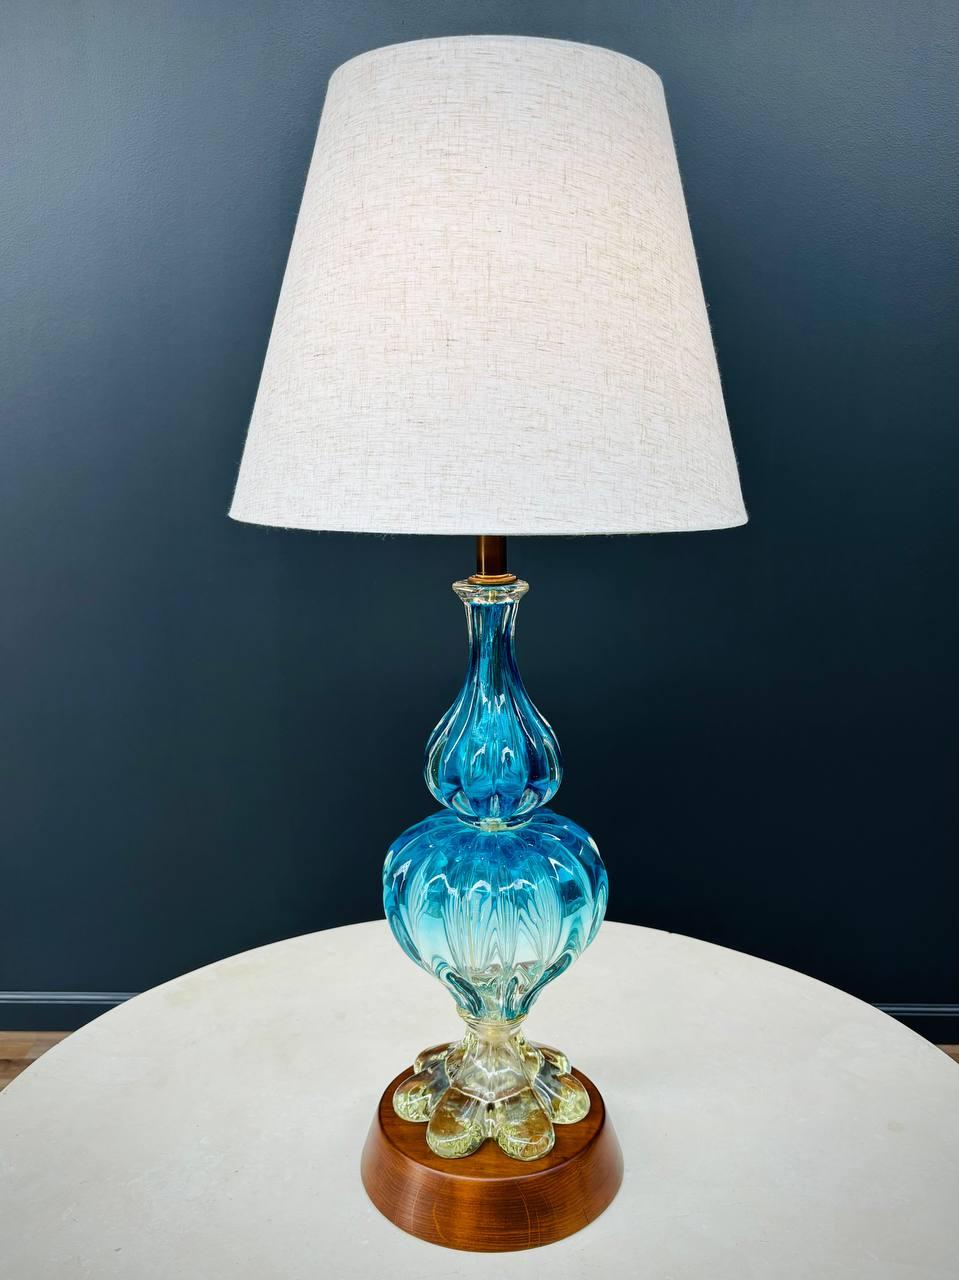 Materials: Italian Murano

Newly Rewired, New Shade

Dimensions 
36”H x 9.25”W x 9.25”D
Shade:
13.25